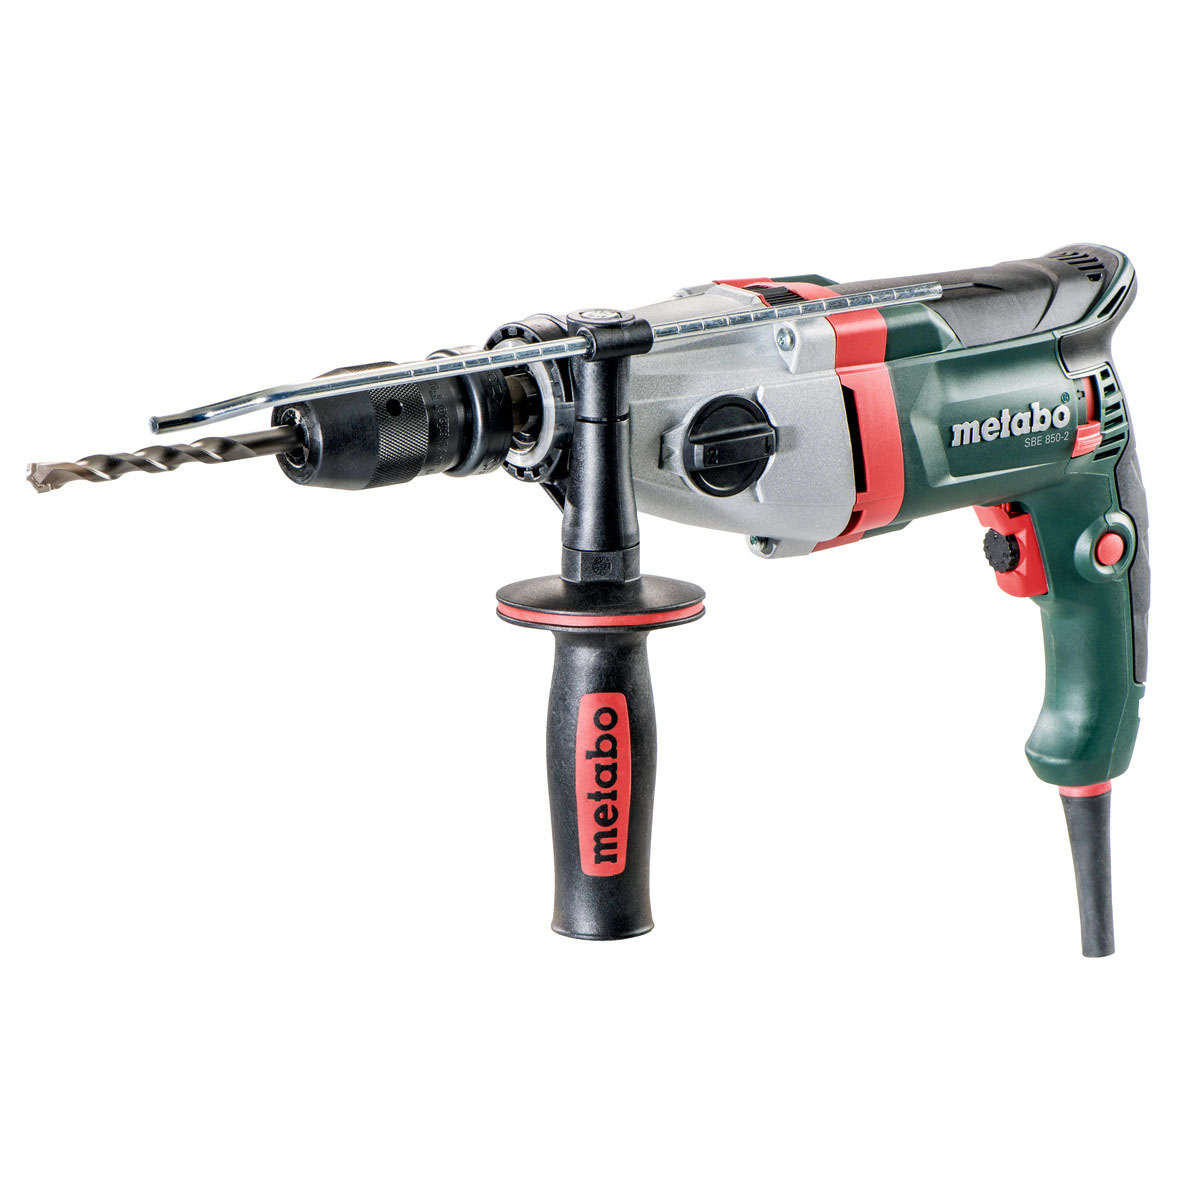 Metabo Sbe850-2 110volt Impact Drill